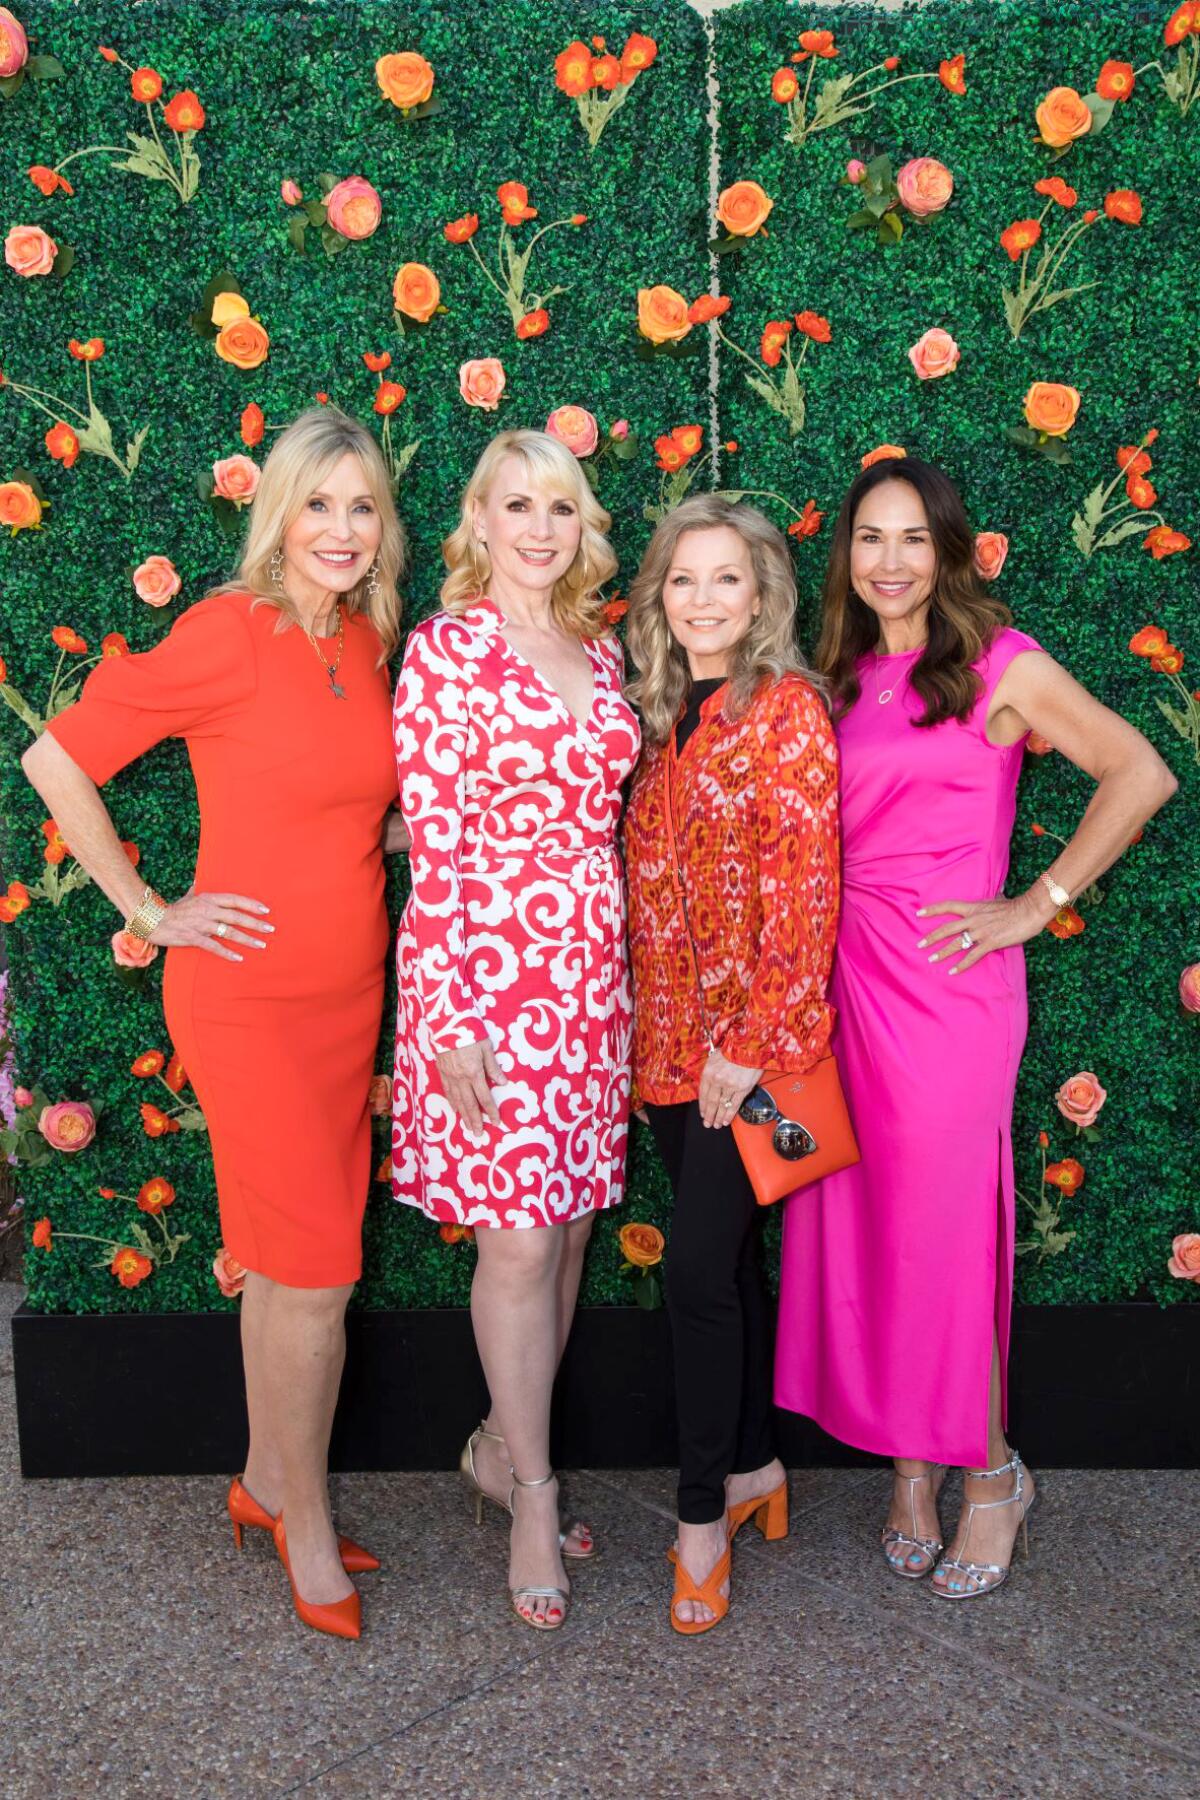 Patti Edwards, from left, Gina Van Ocker, Cheryl Ladd and Patricia Ford at the spring fashion luncheon for Childhelp.